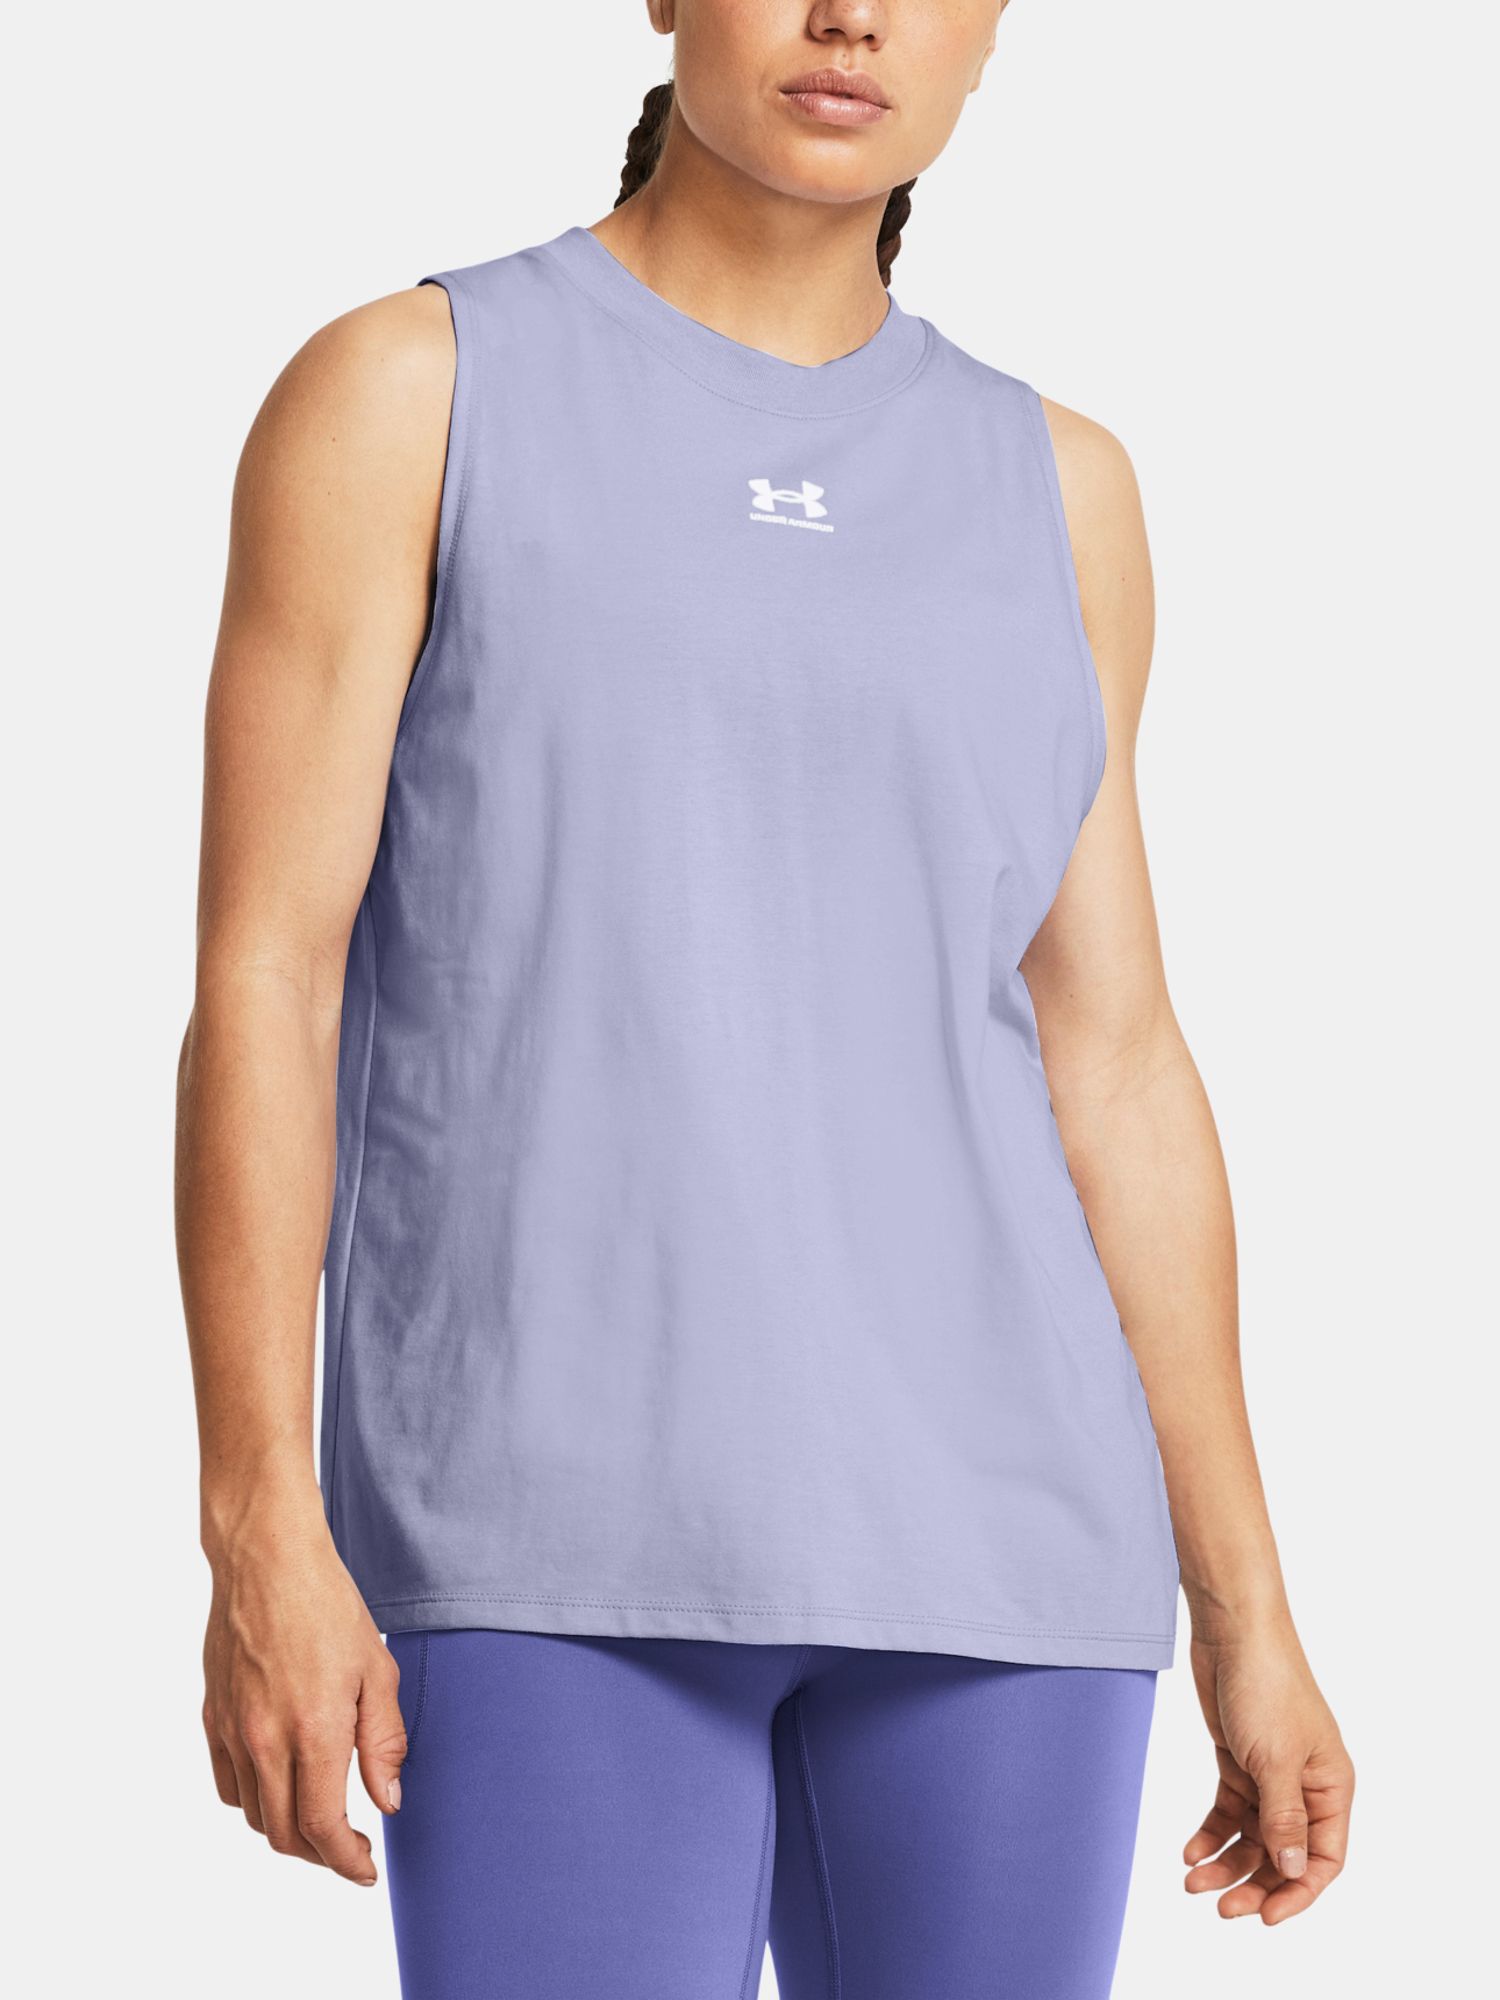 Under Armour Campus Muscle Tank Top - PPL - Women